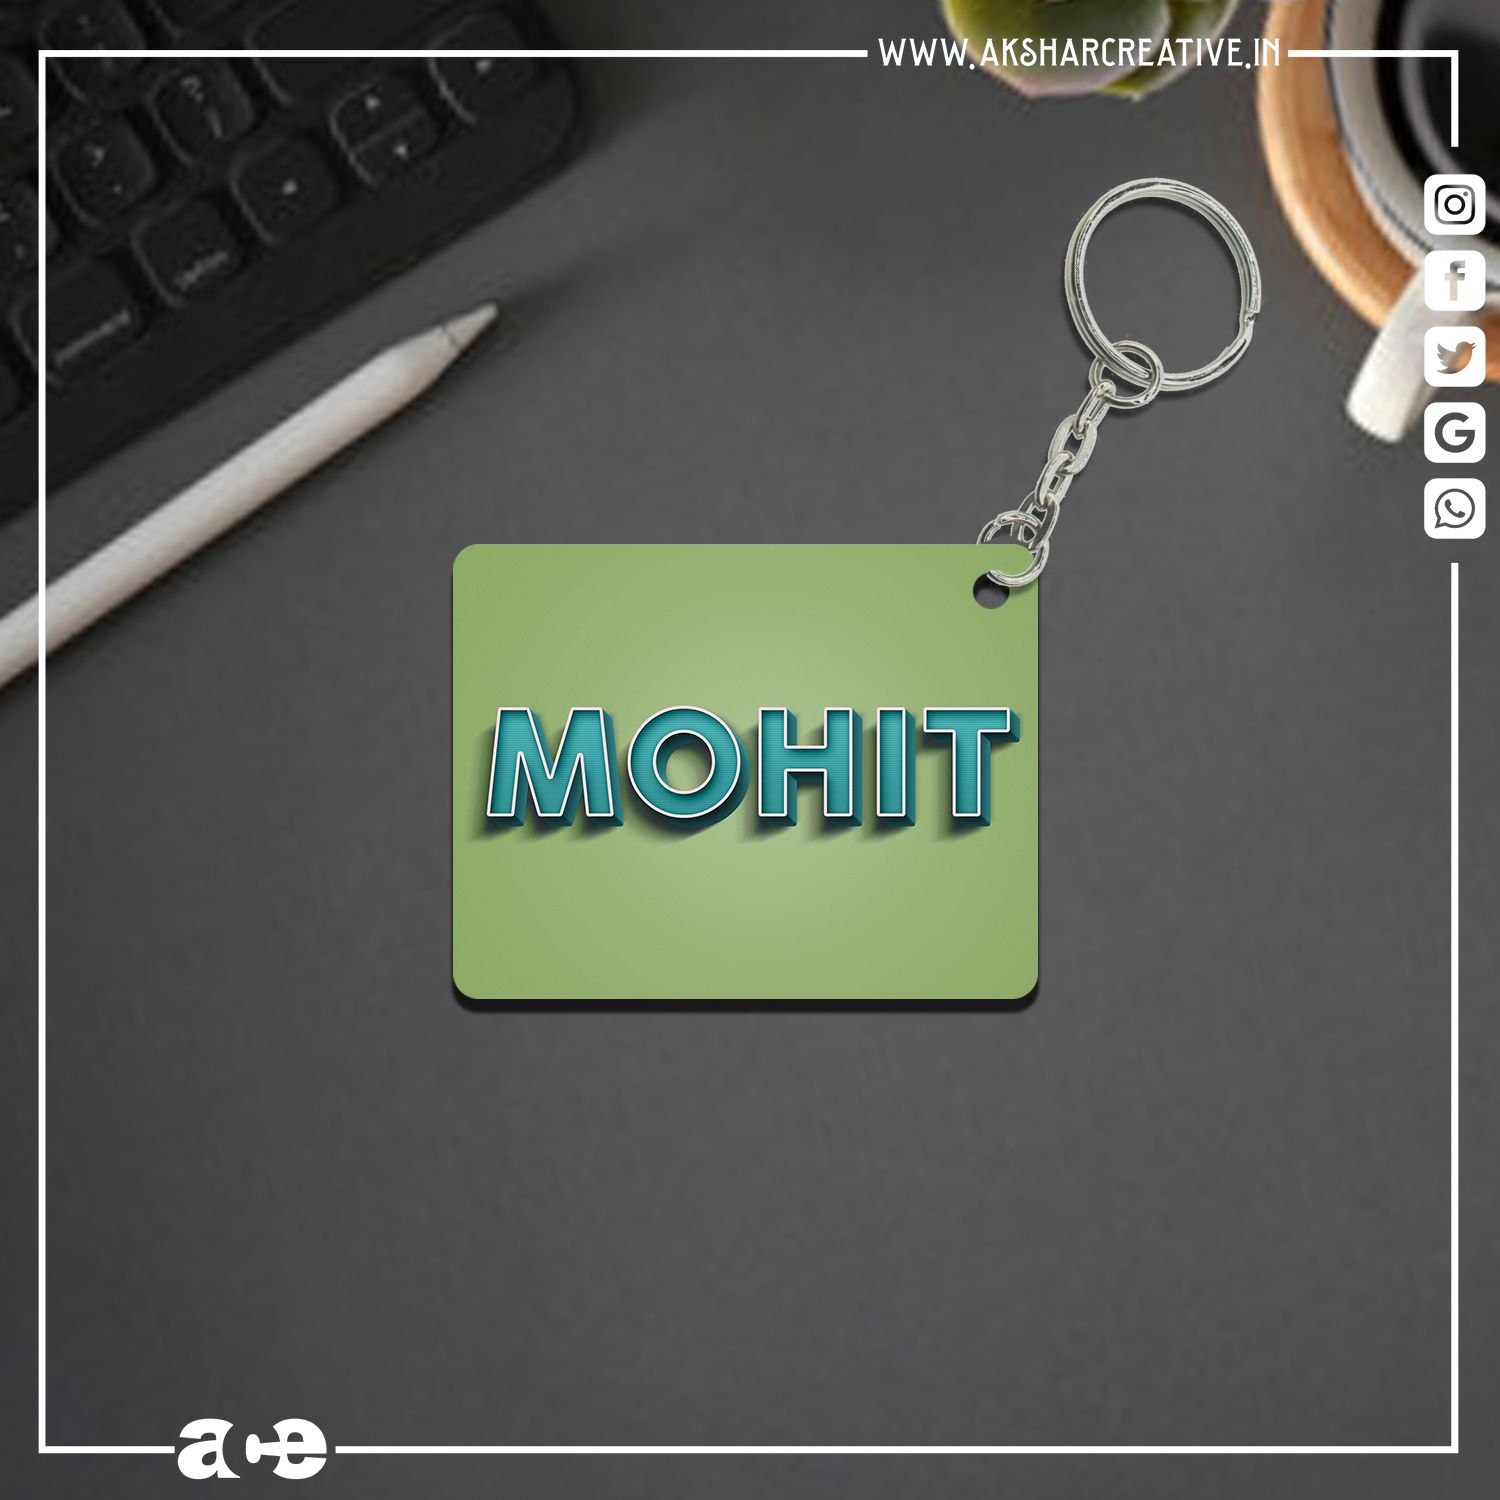 Mohit Tank Top, Sweaters, Sweatshirts, Hoodies, T-Shirts, Meaning -  MakeUpDesign